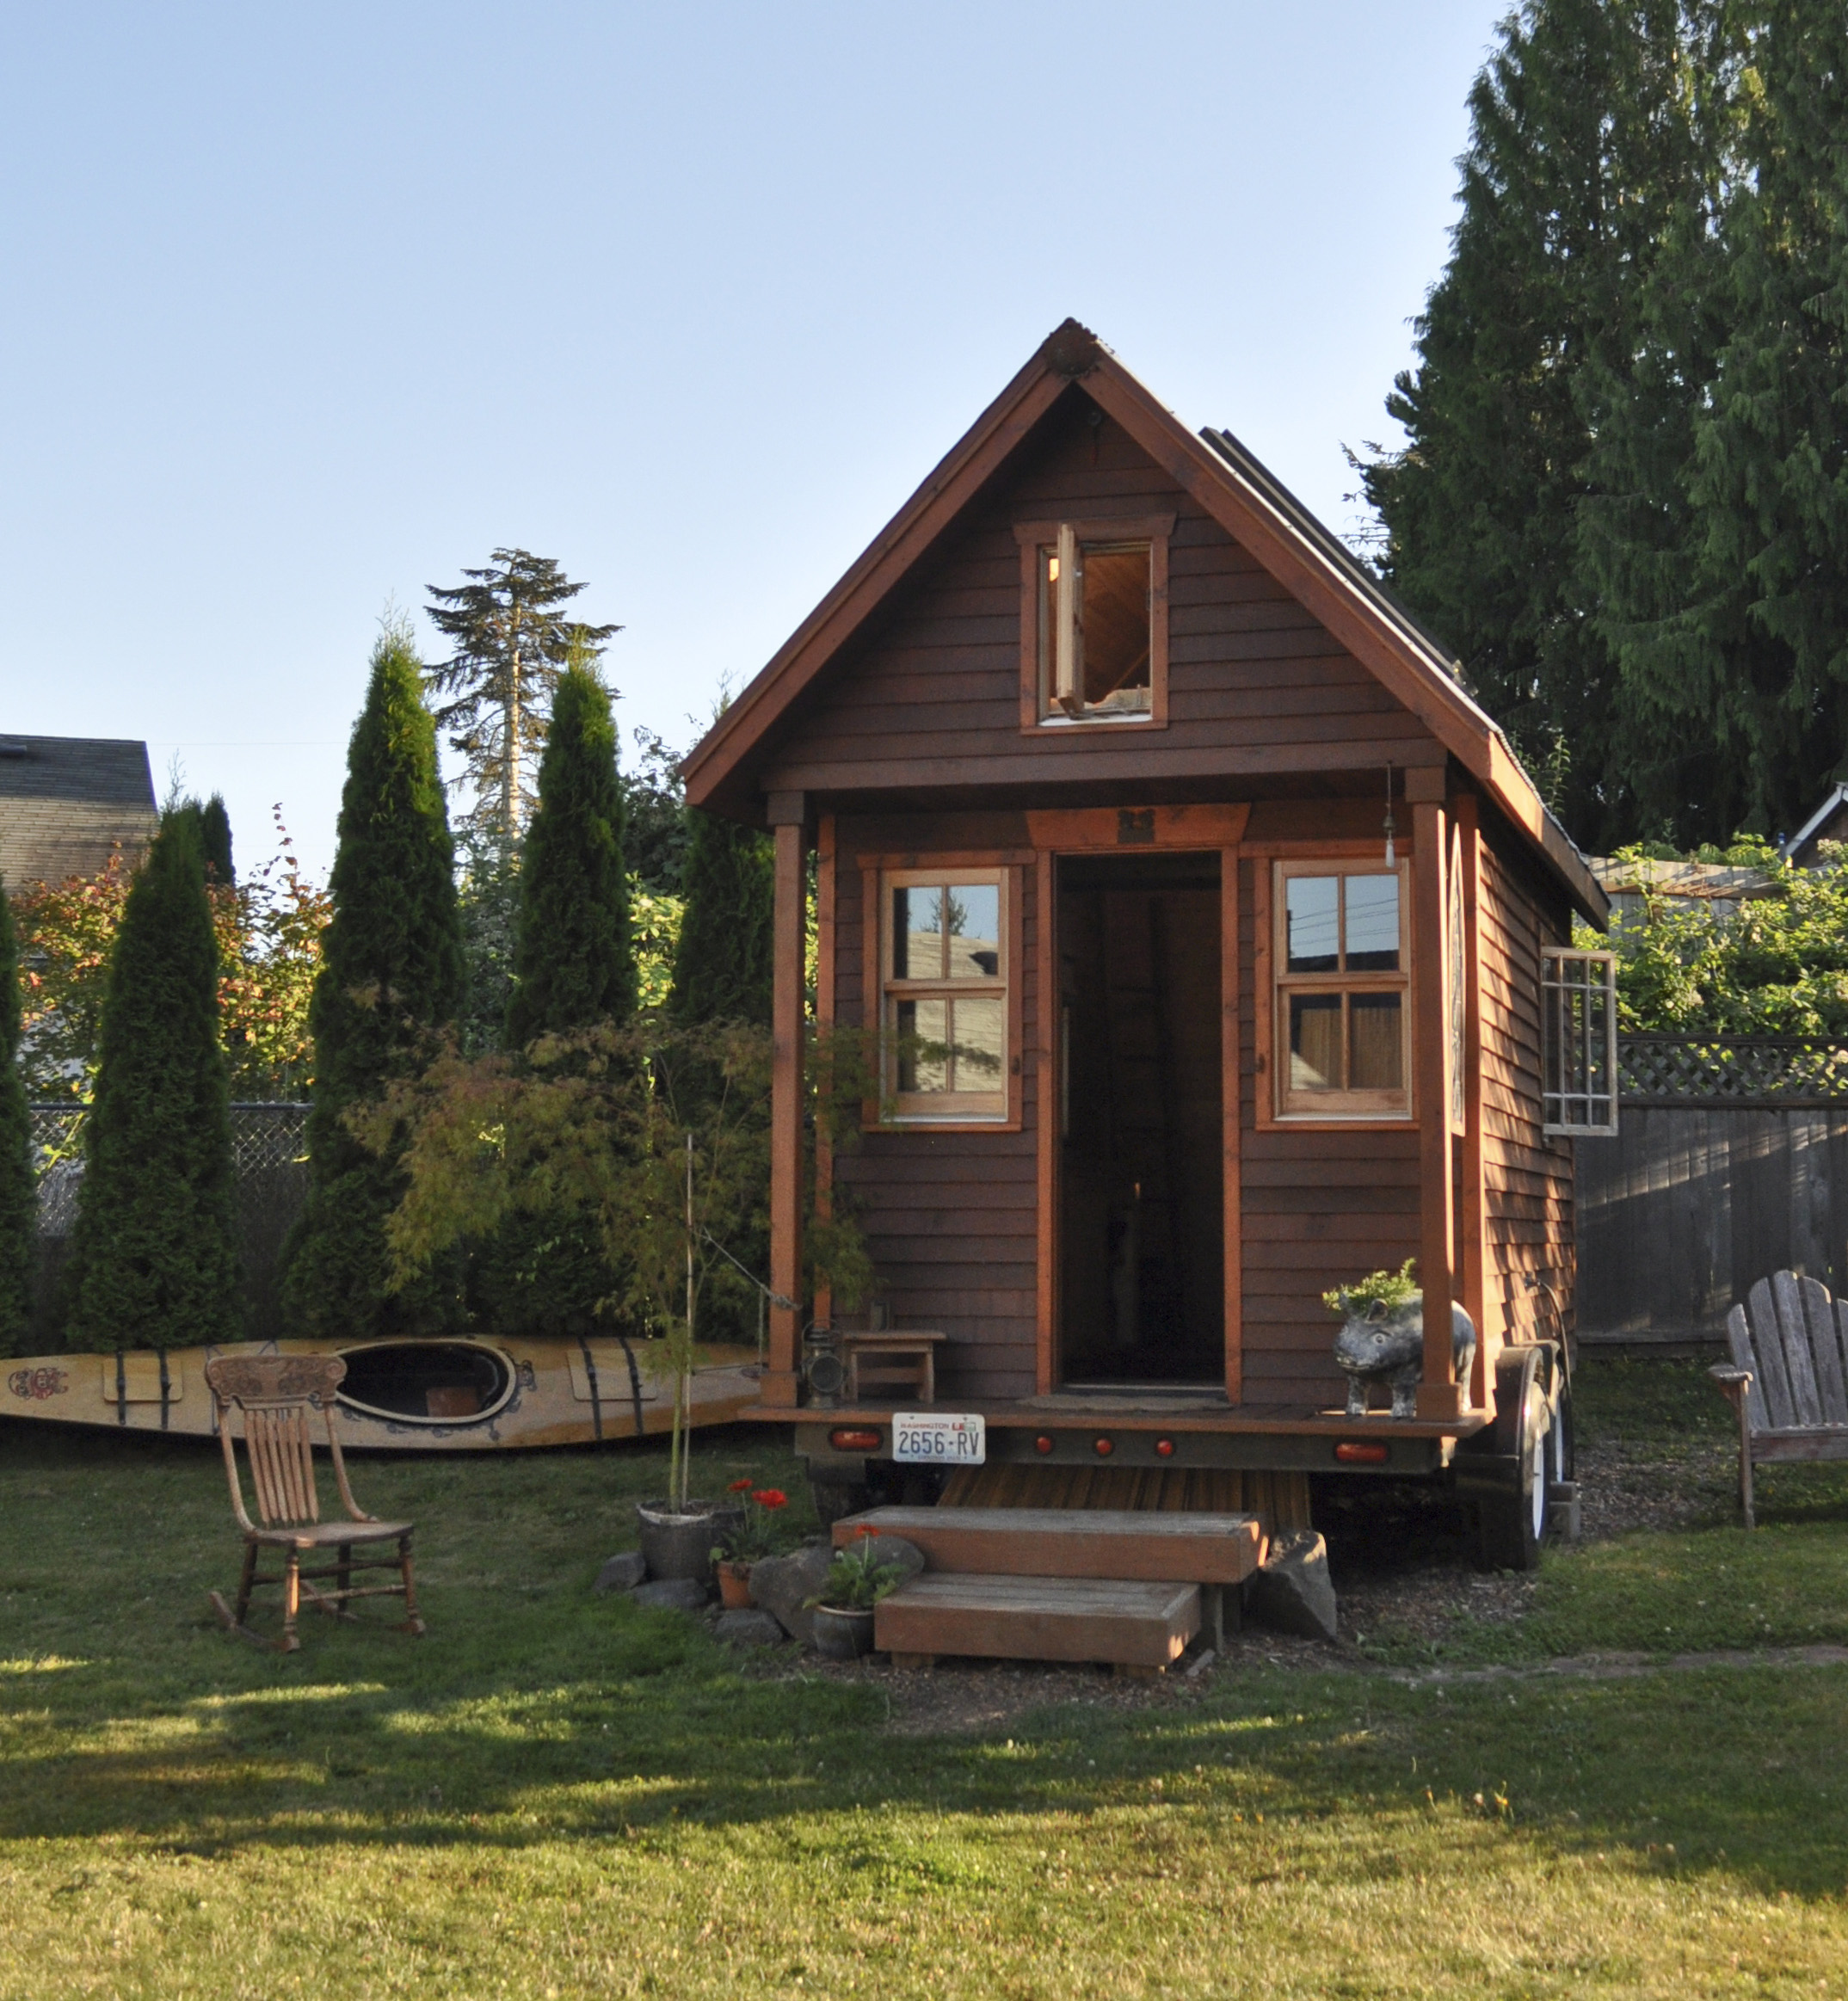 Green Thoughts: Small houses make room for change